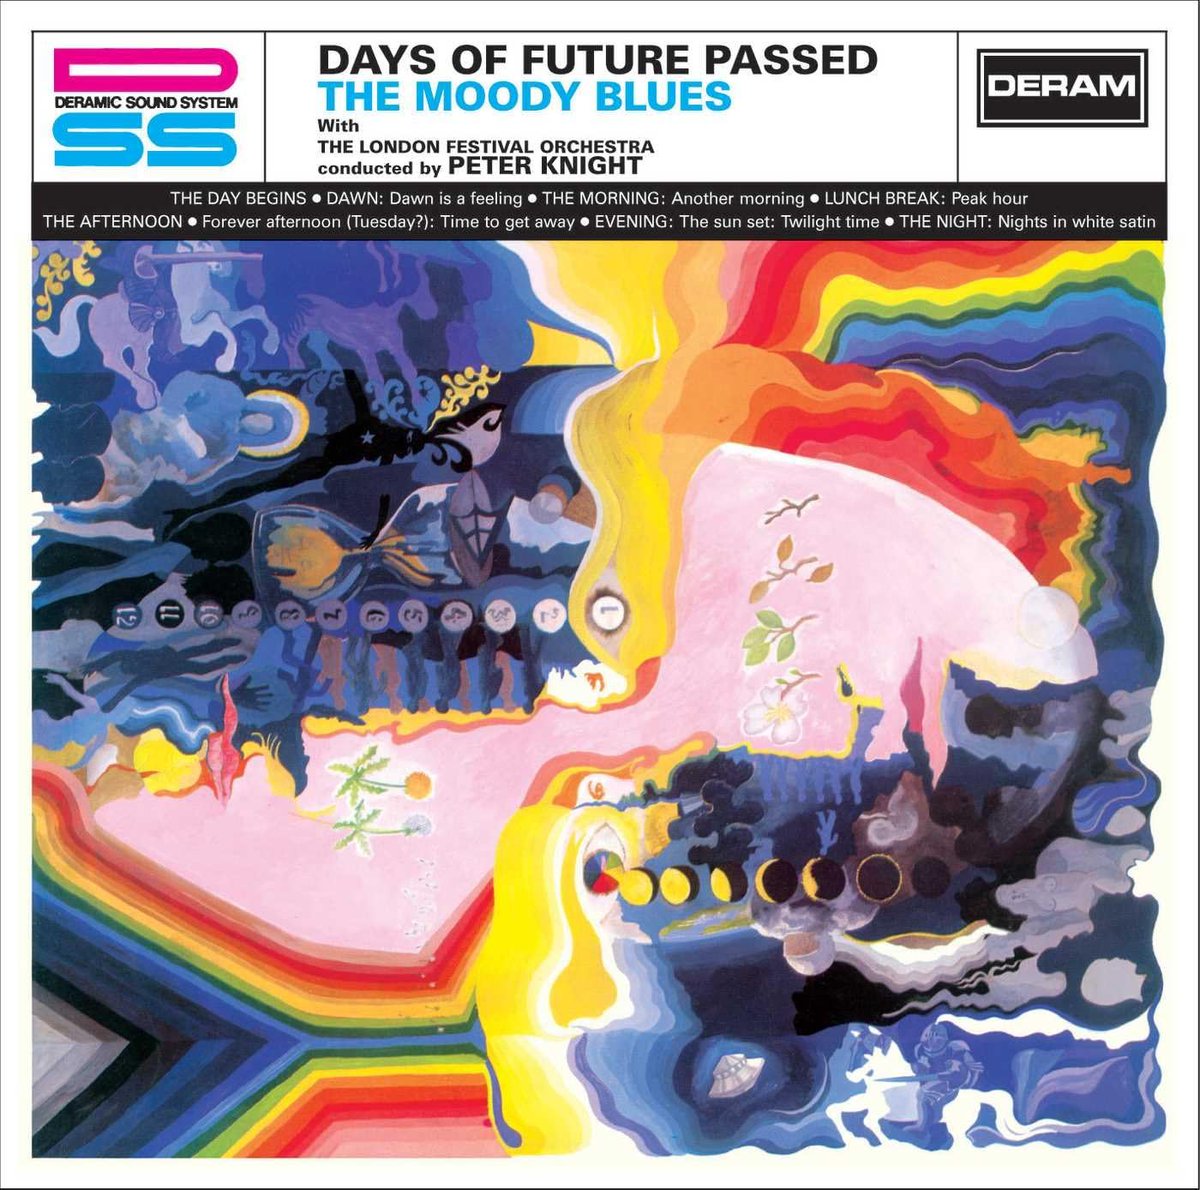 The Moody Blues - Days of Future Passed, 1967 The album represents a significant creative turning point for the band. The album was a moderate success upon release, but steady FM radio airplay and the success of hit single 'Nights in White Satin'.